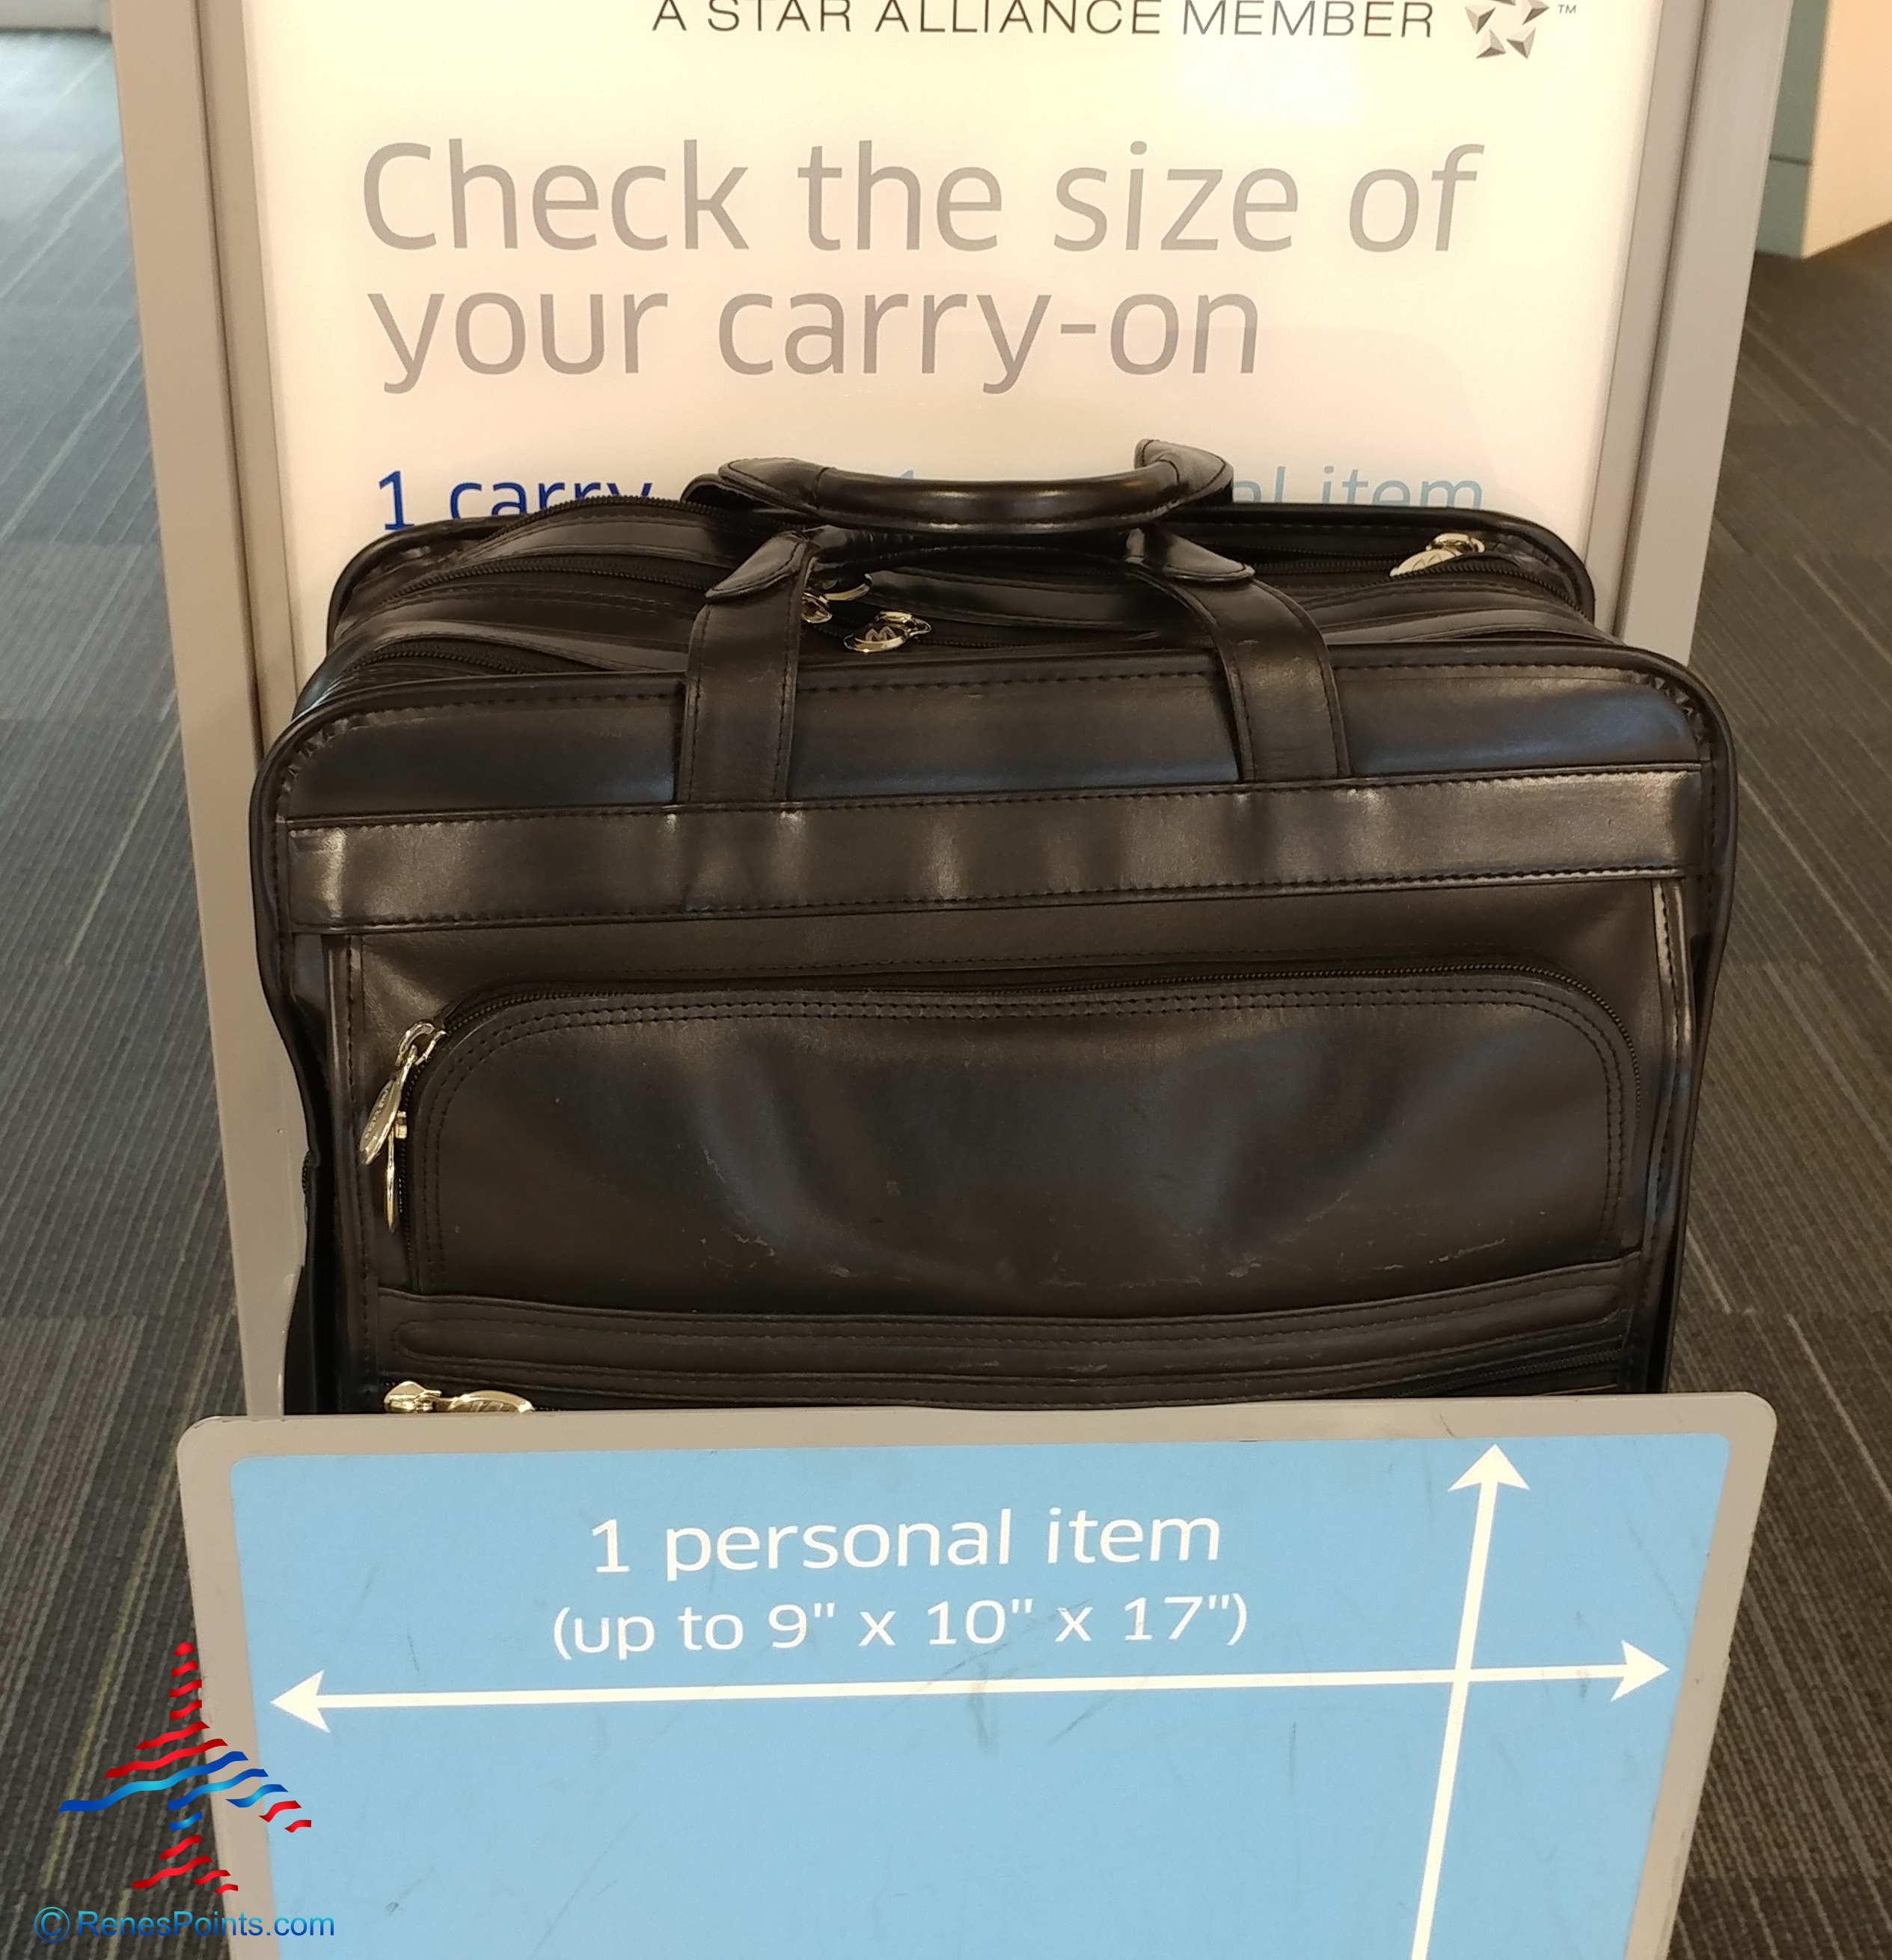 What is the United and American Airlines carryon bag check real size check tester like - we ...